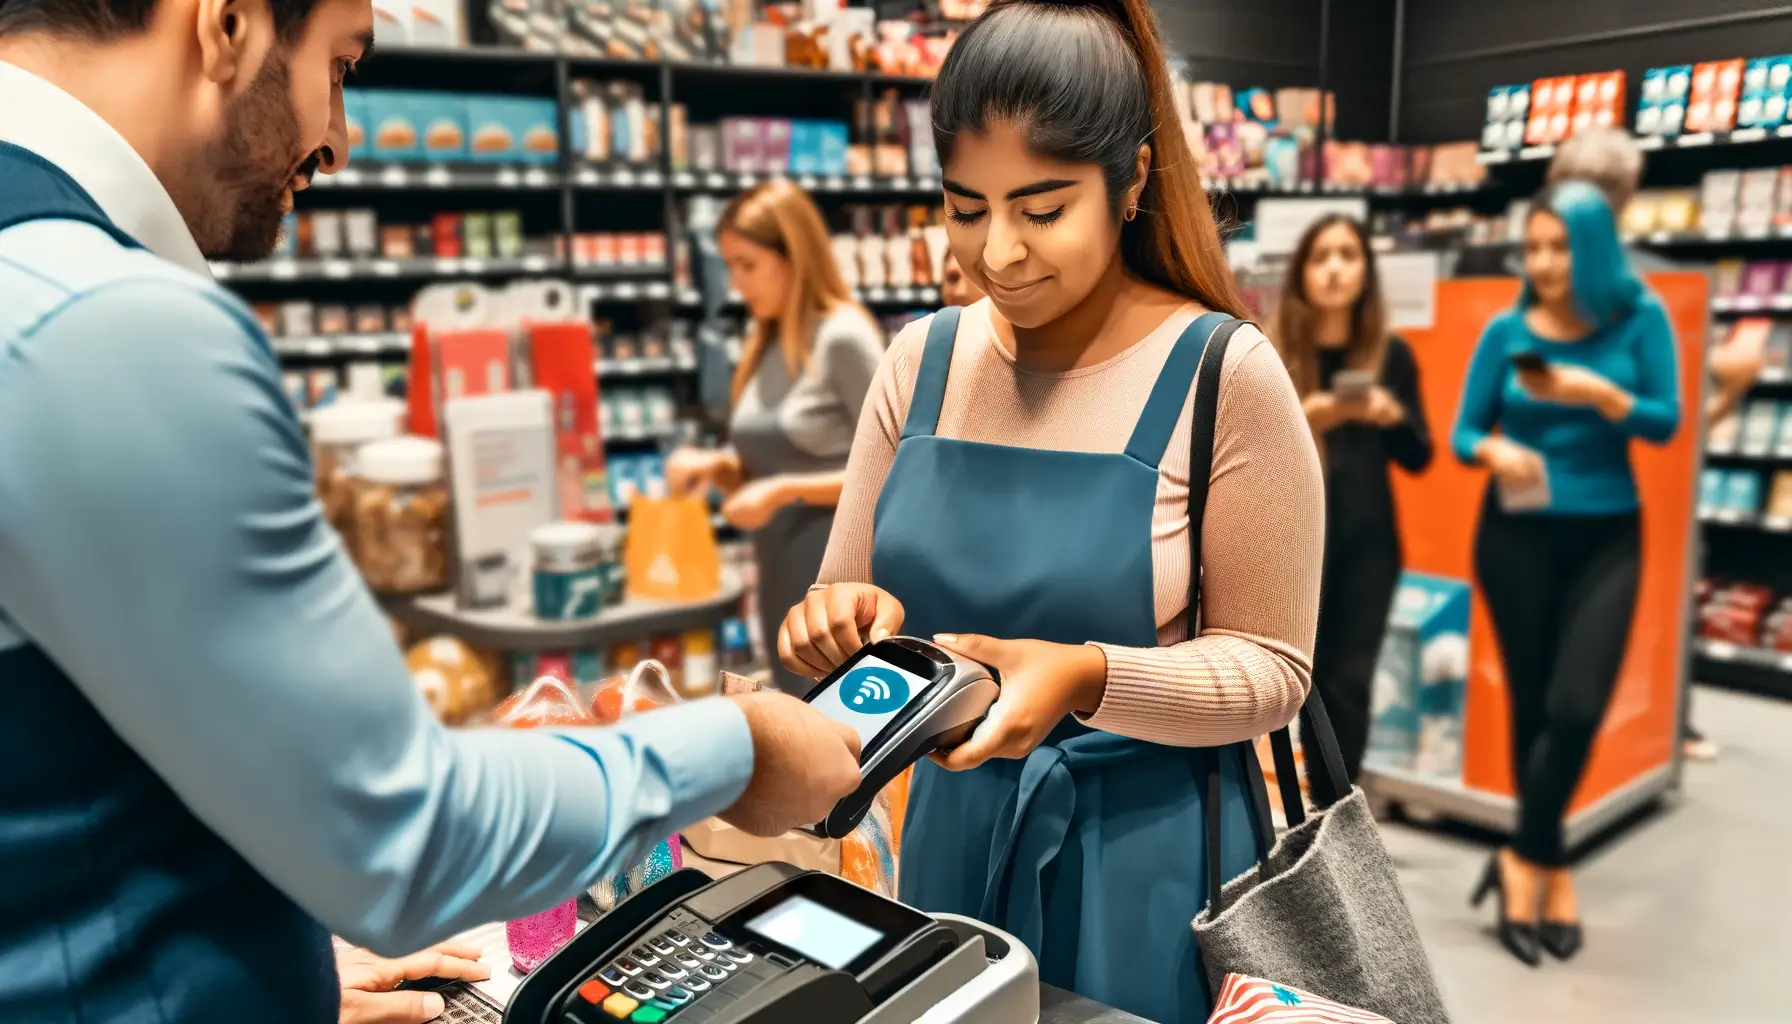 boost cash flow with contactless payment method at checkout